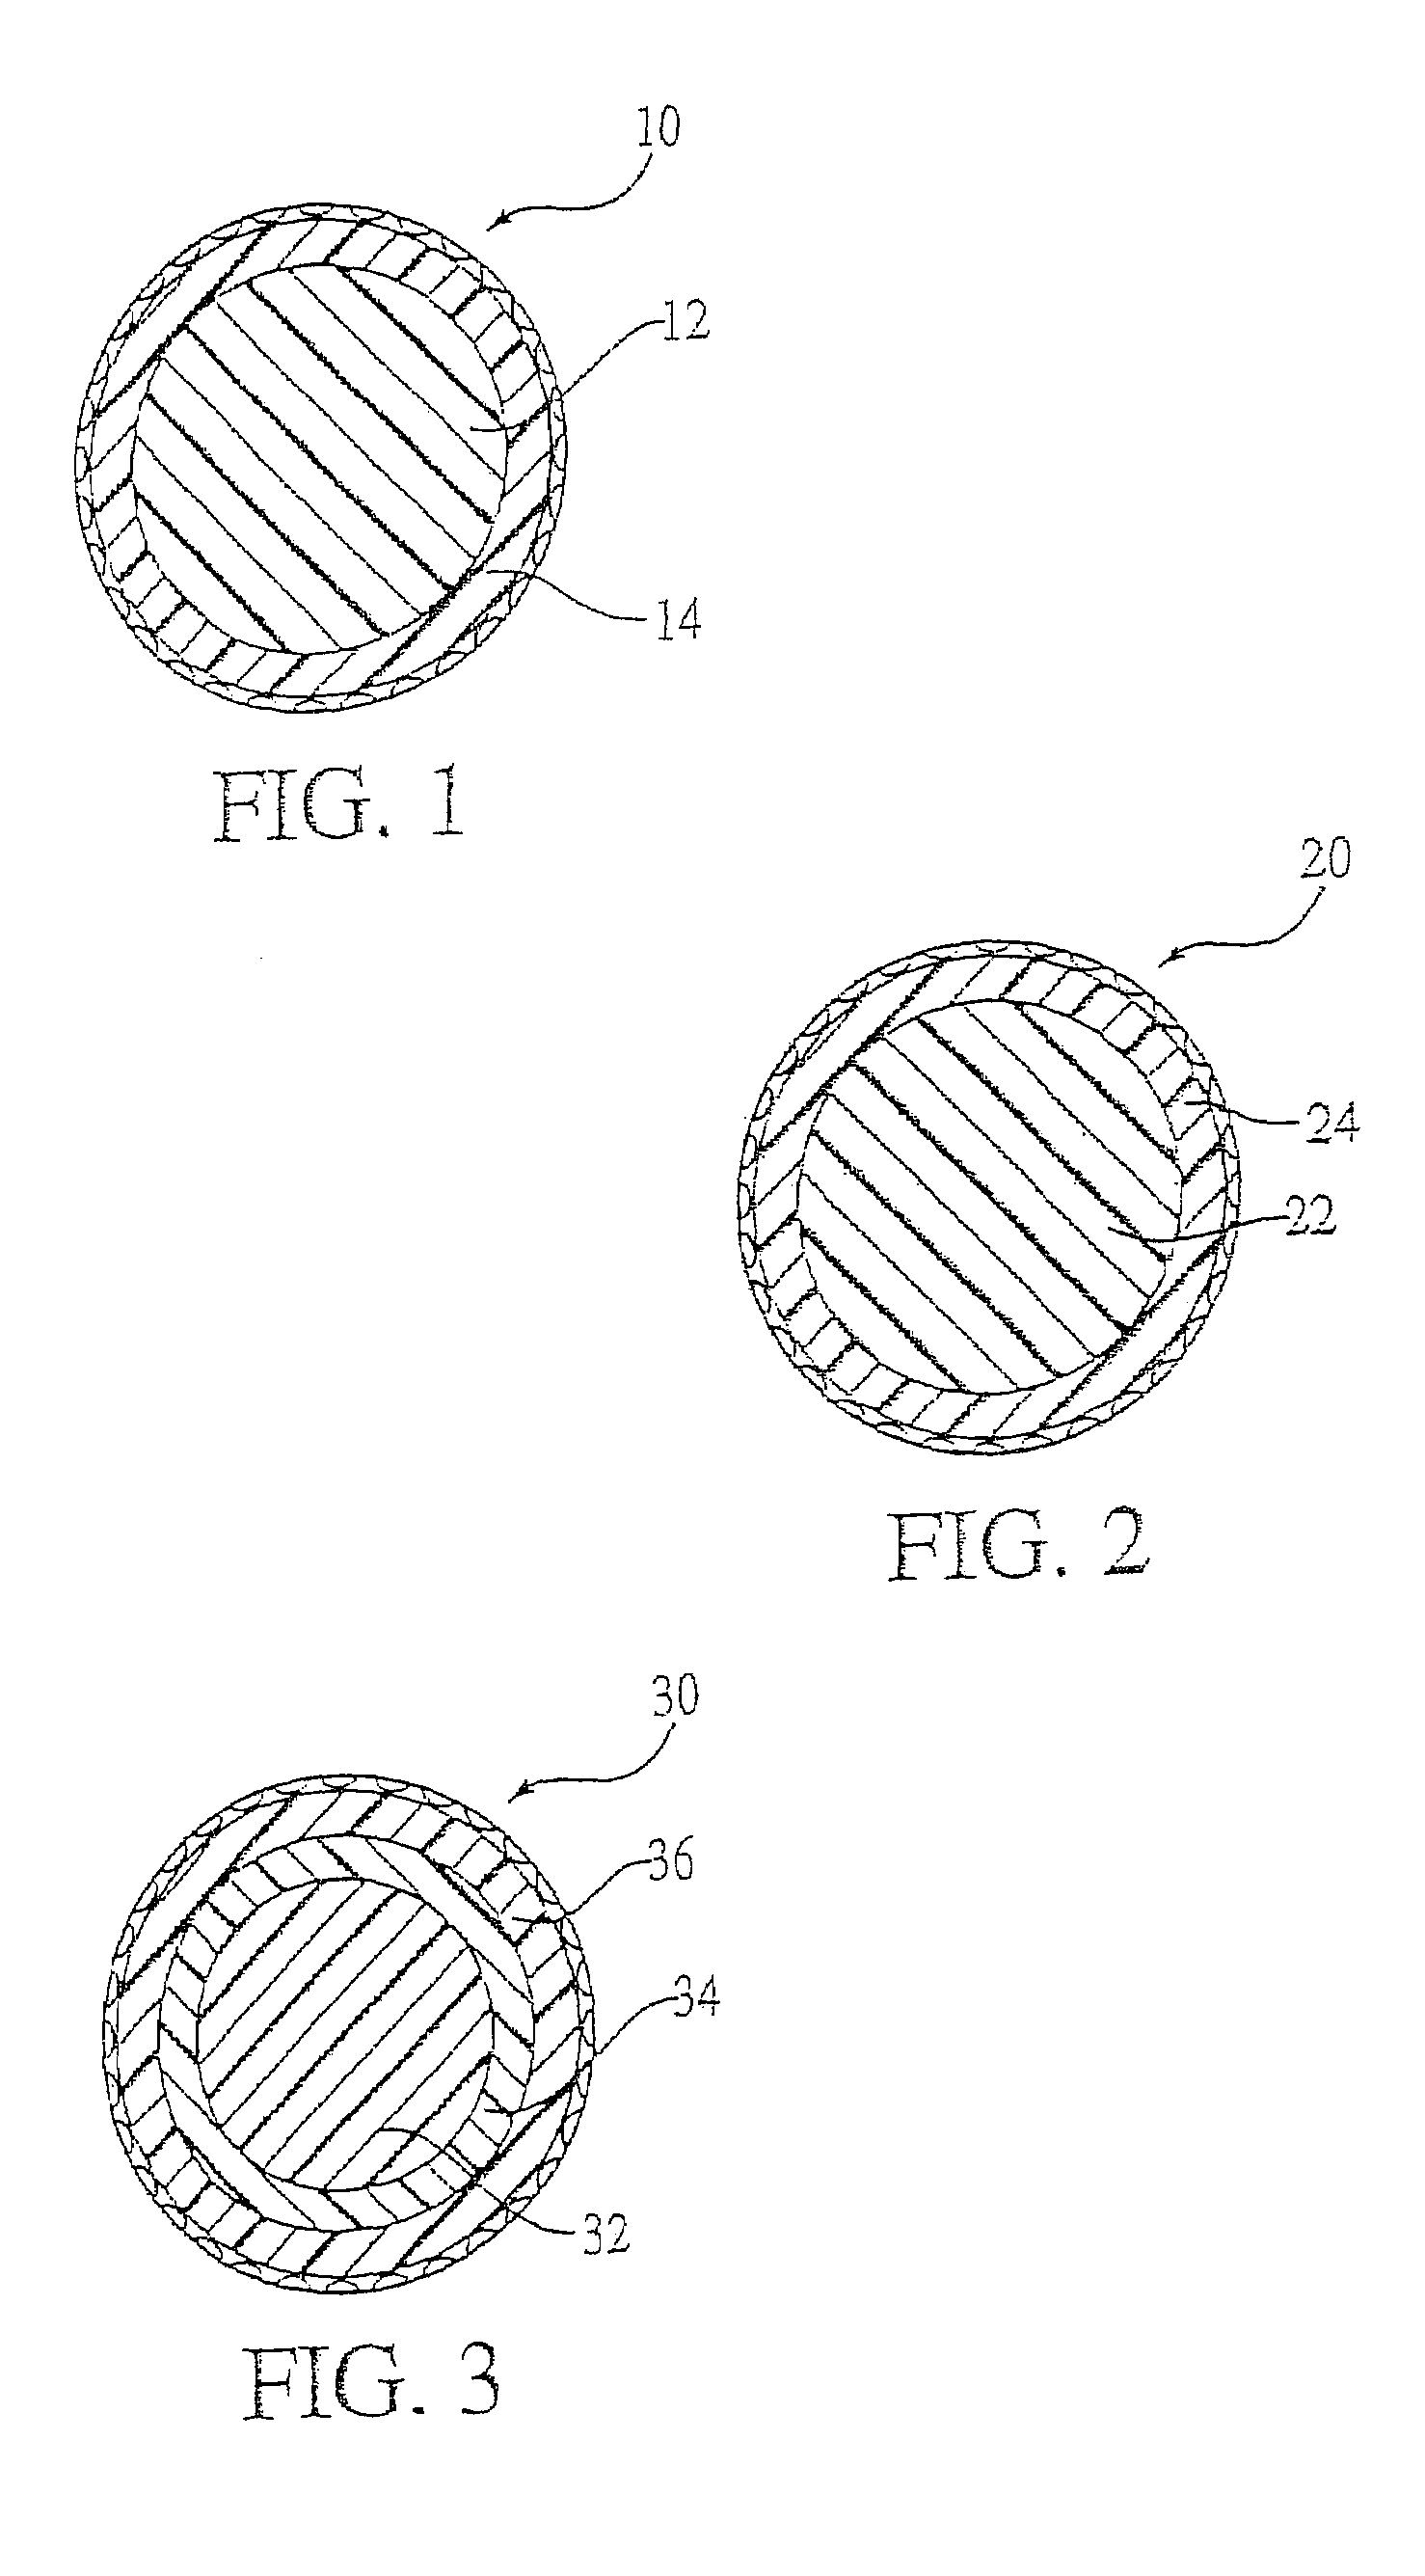 Reaction injection material for a golf ball